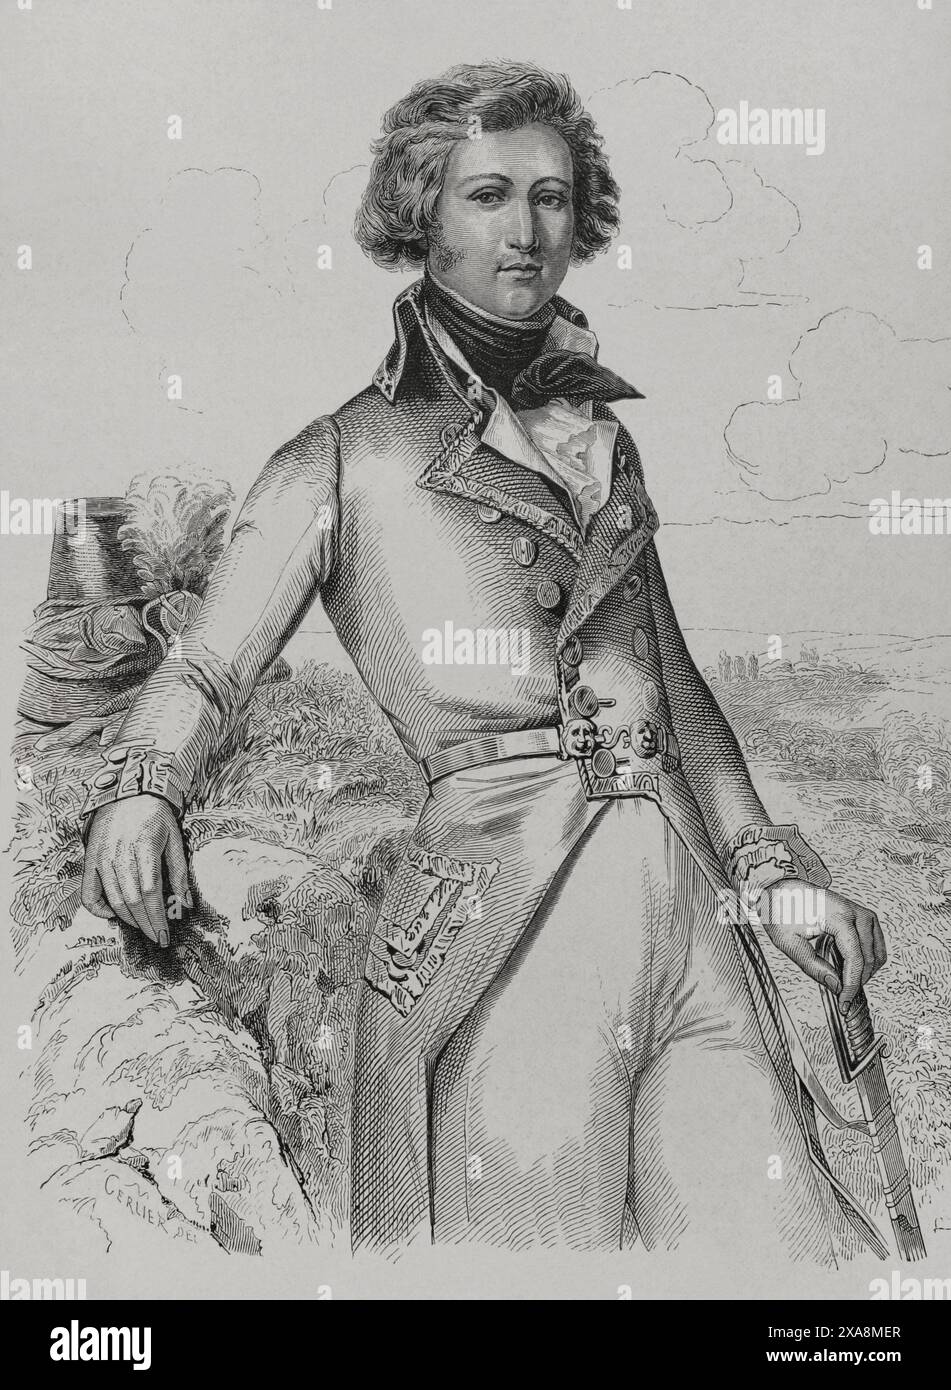 Louis Philippe I of France (Louis-Philippe of Orleans) (1773-1850), Duke of Chartres. King of the French (1830-1848) Portrait of the Duke of Chartres. Drawing by Cerlier. Engraving. 'History of the French Revolution'. Volume I, 1876. Stock Photo